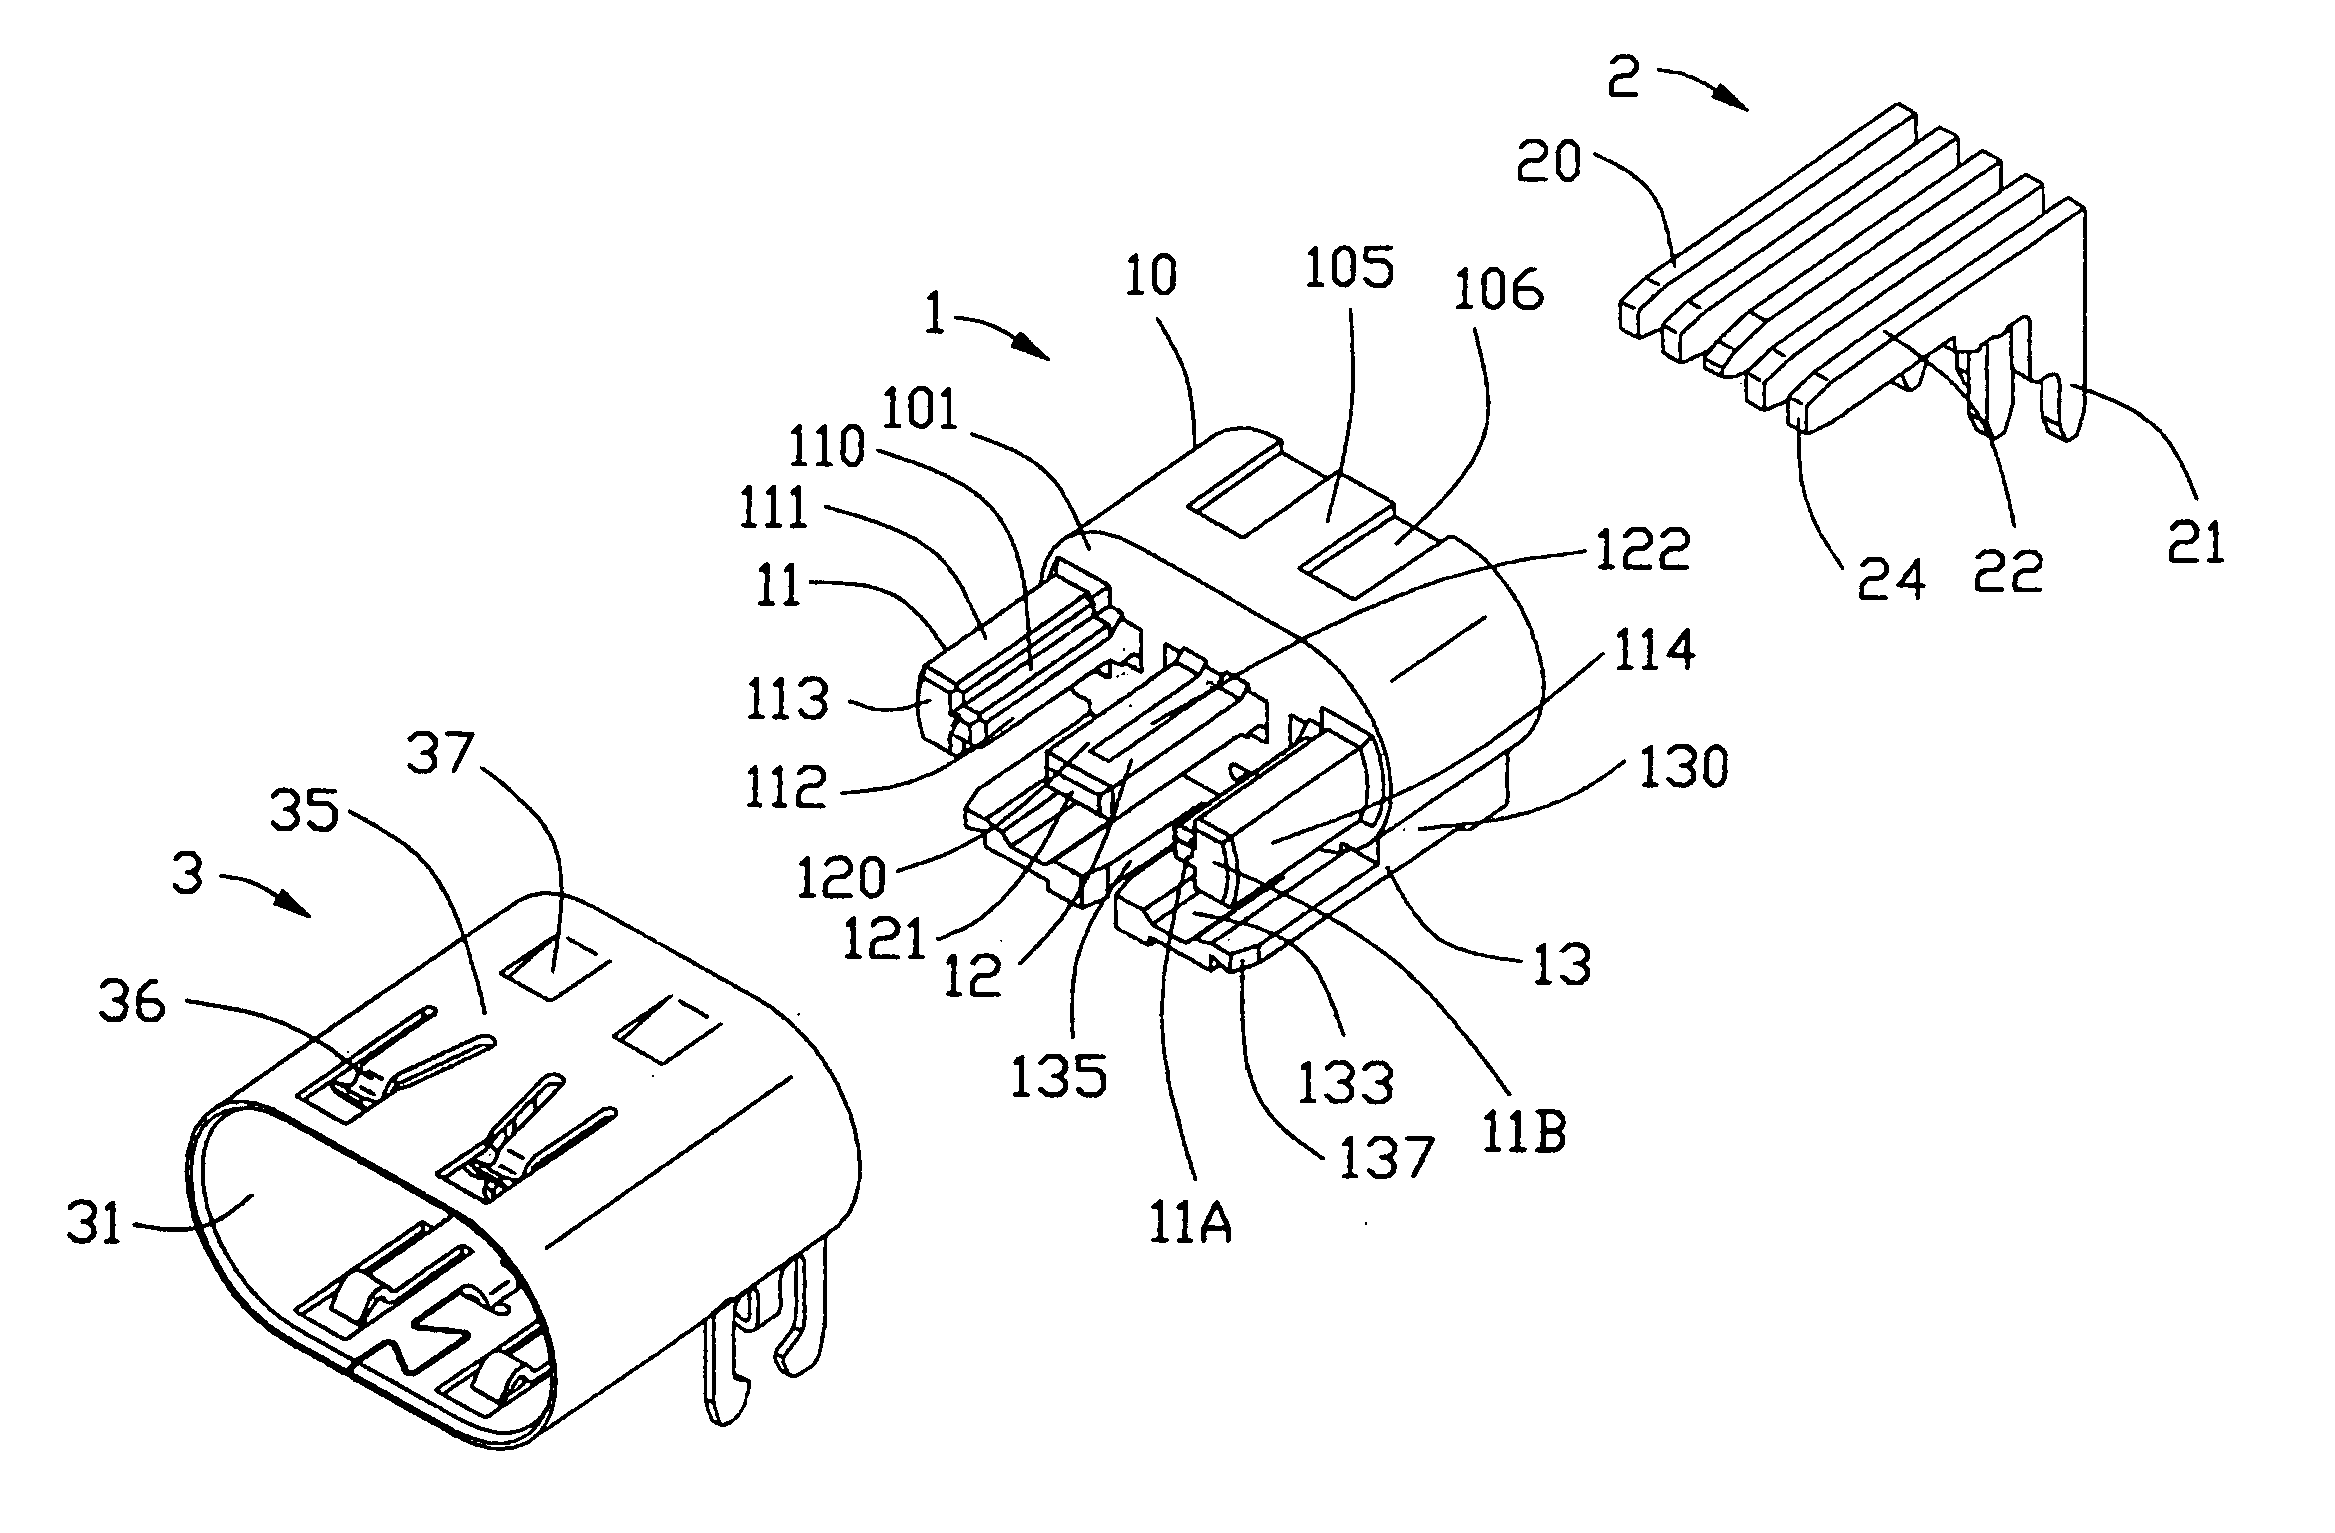 Electrical connector having structures for preventing deflected-insertion